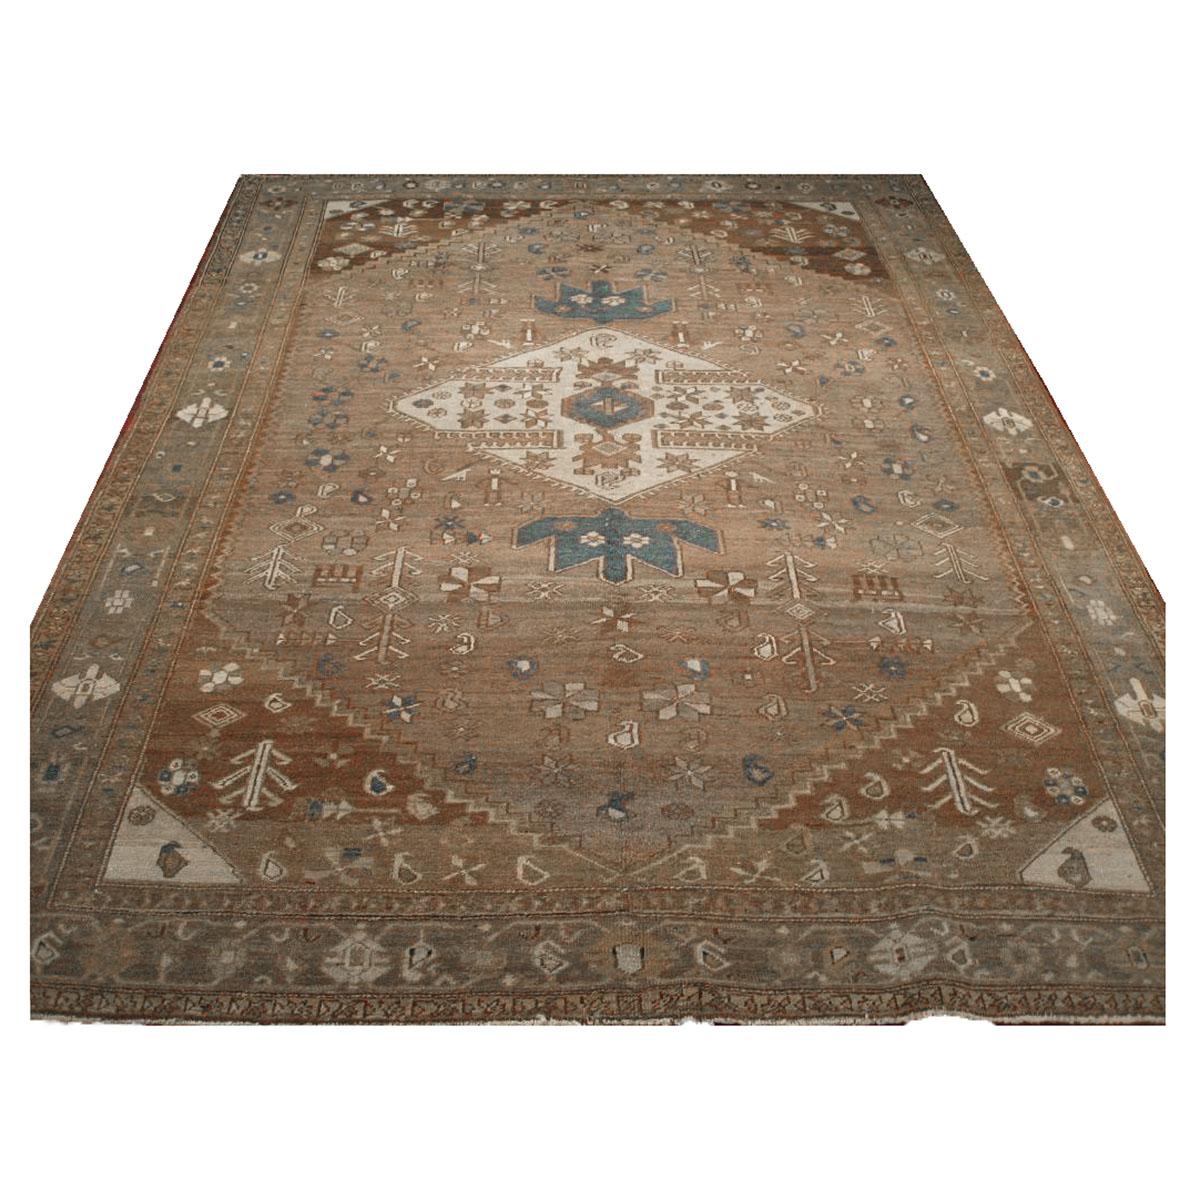 20th Century Antique Persian Heriz 7x9 Brown Handmade Area Rug In Distressed Condition For Sale In Houston, TX